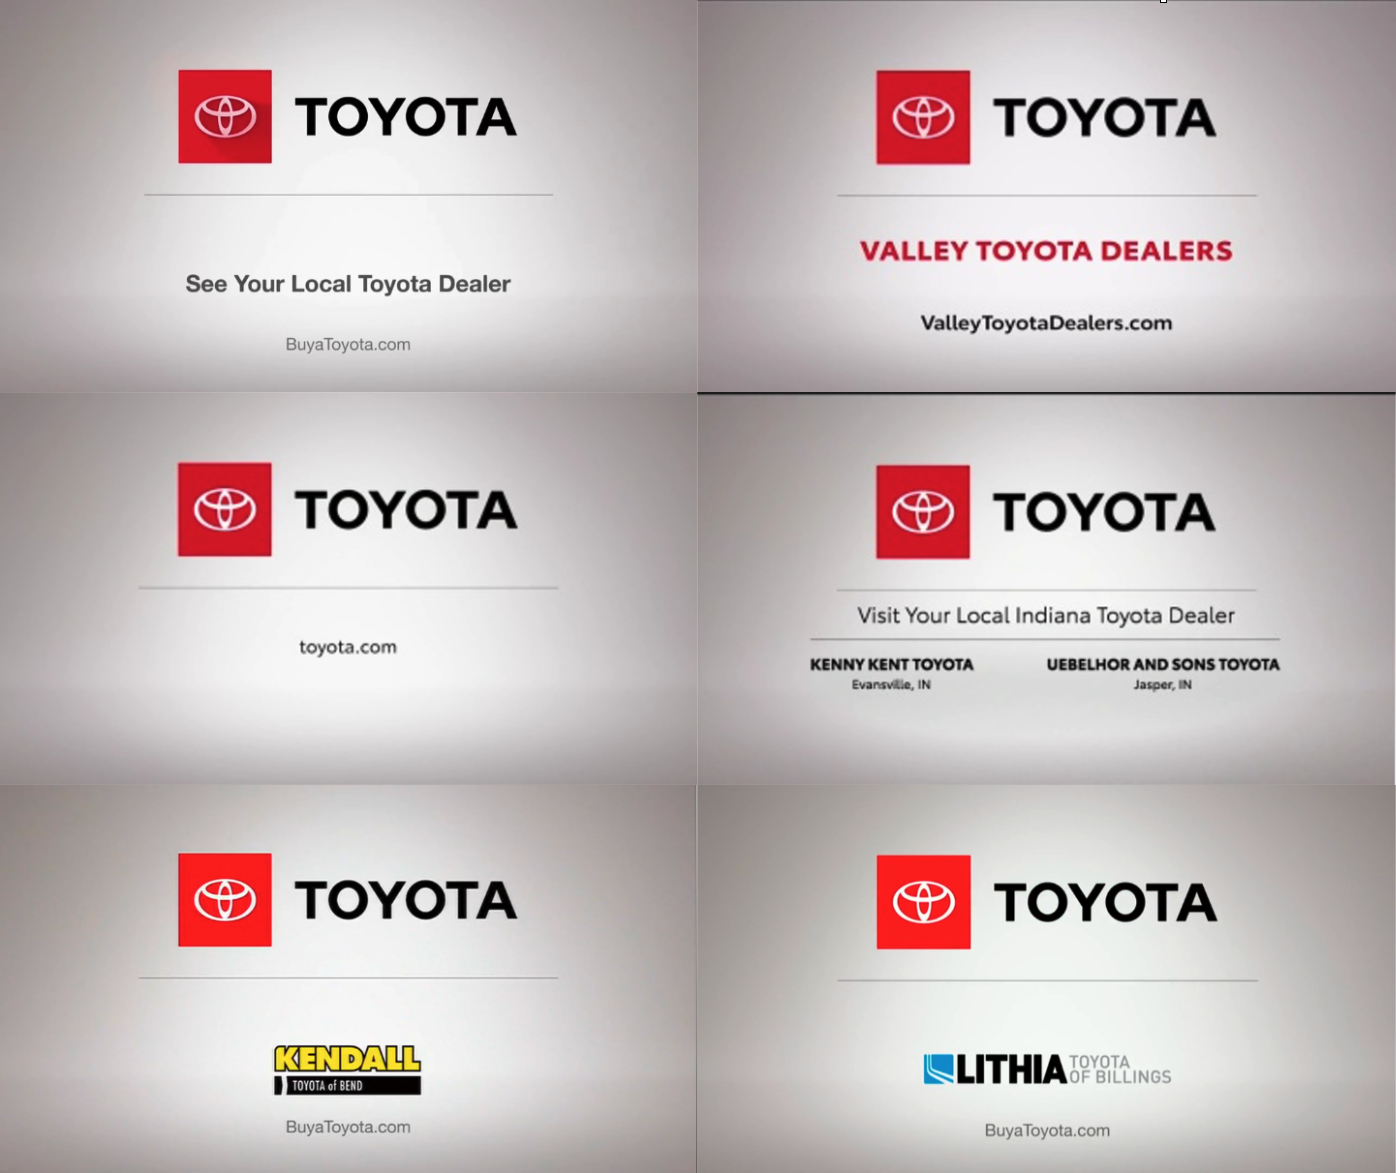 Different exit screens for Toyota ads